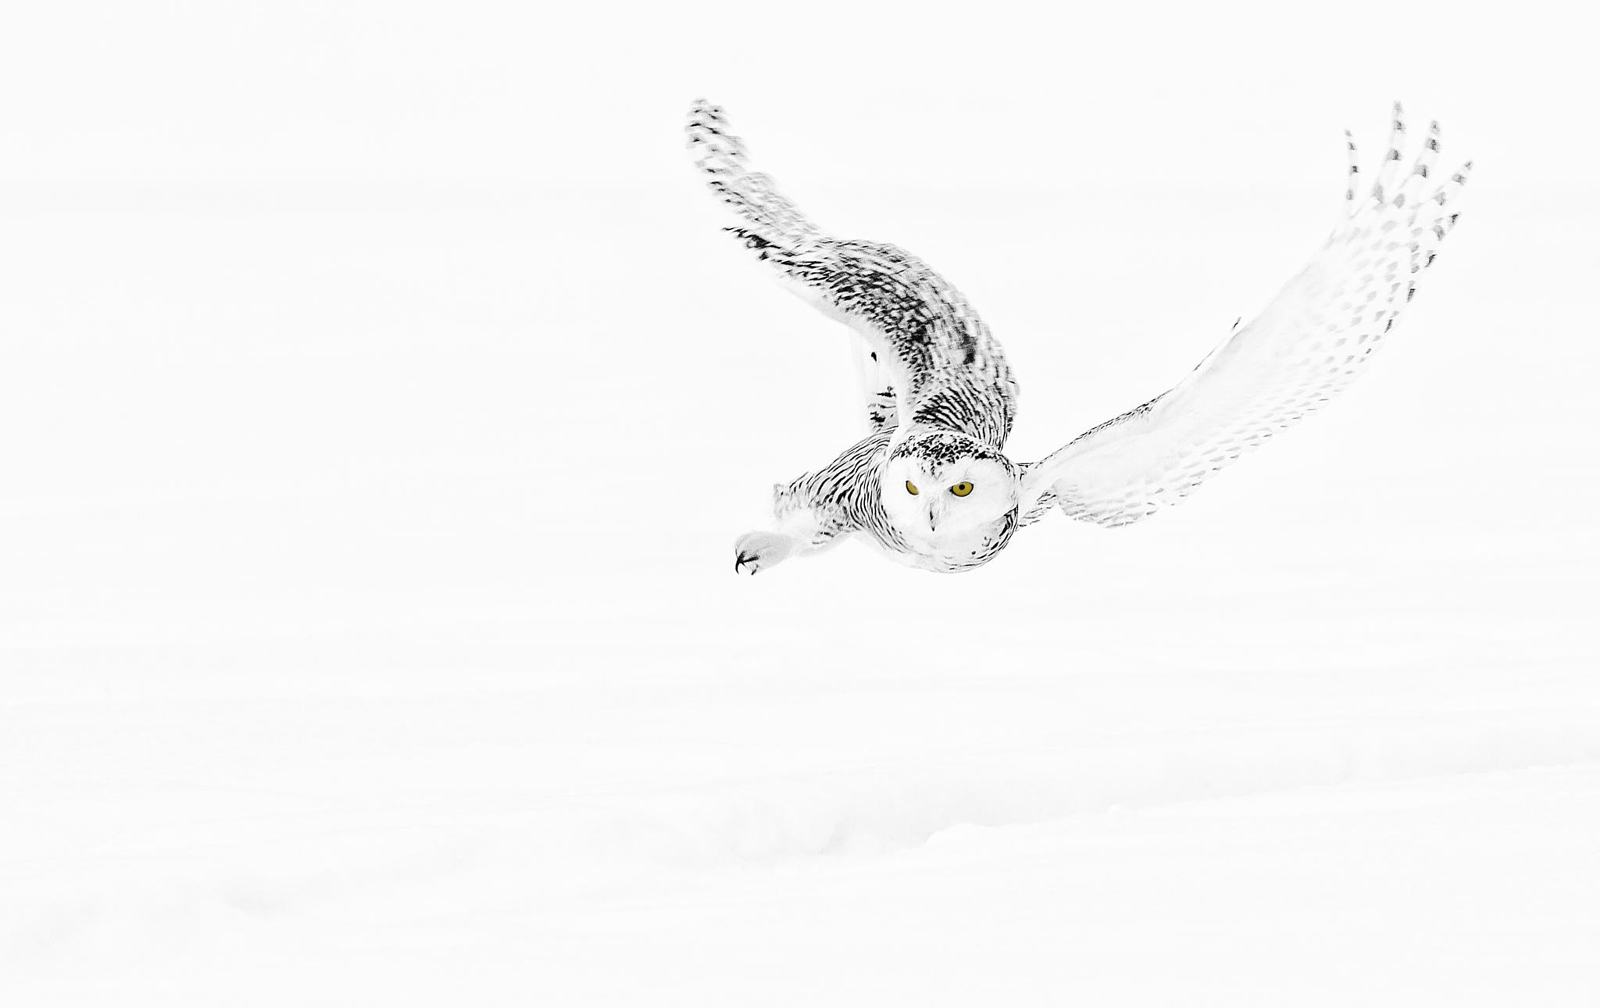 25 Majestic Photographs of Owls in the Snow